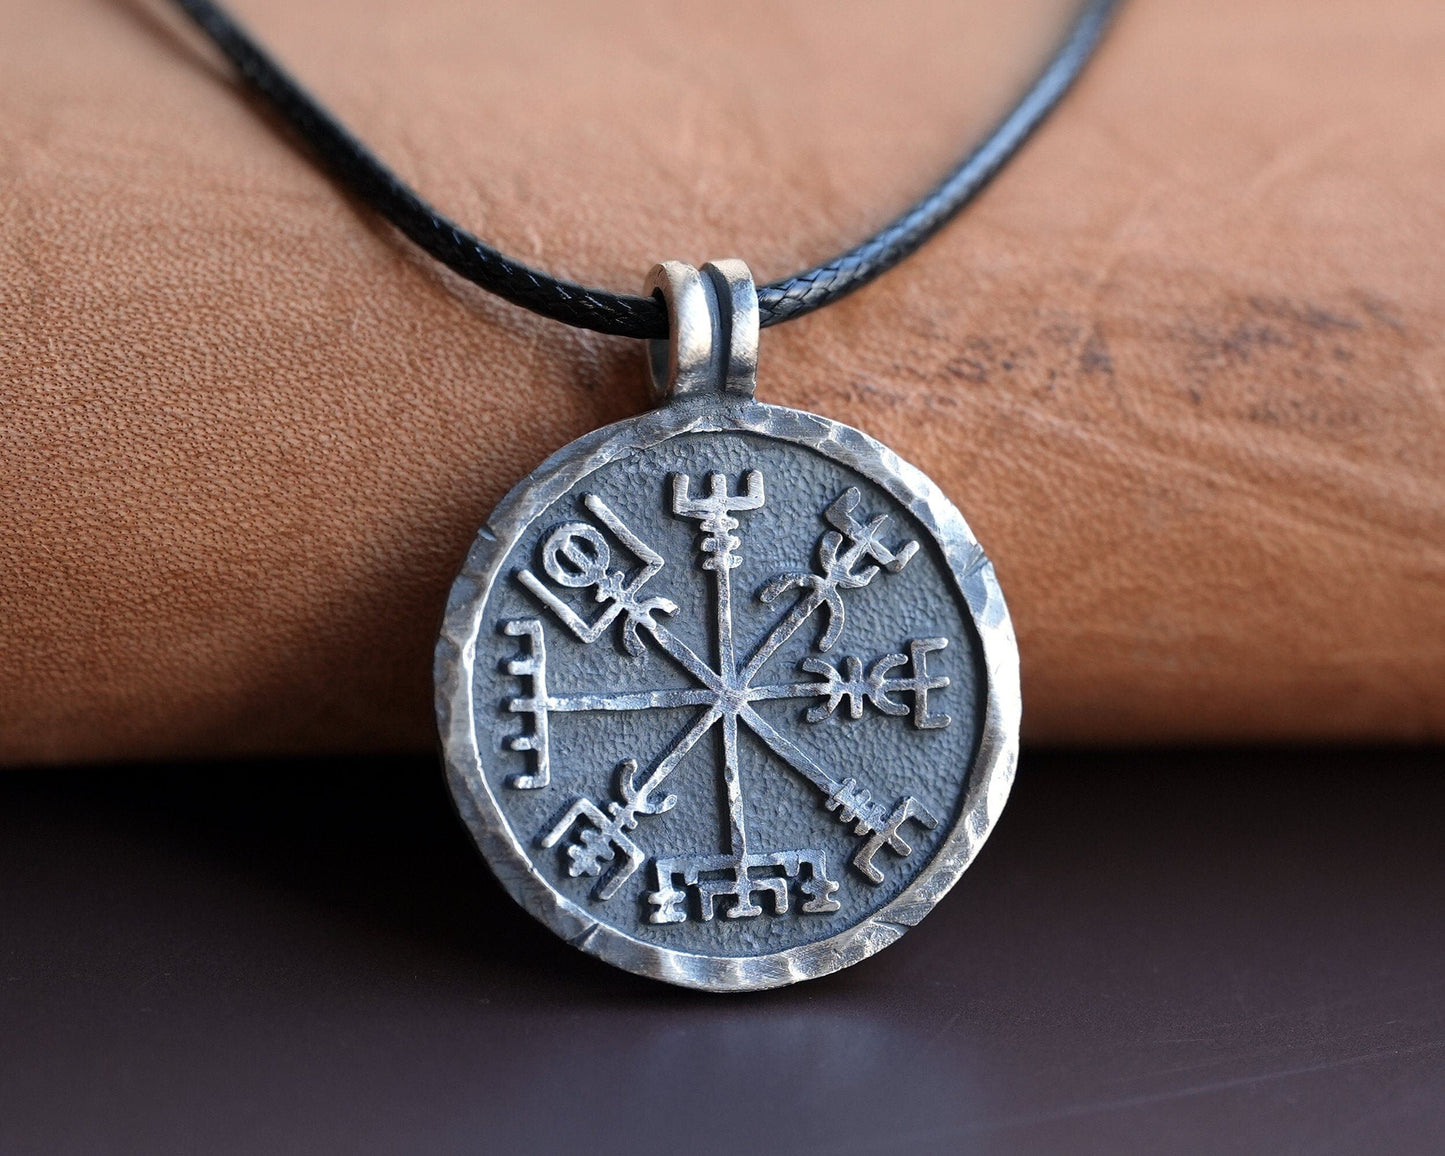 925 Sterling Silver Compass Necklace For Men With Adjustable String Handmade By Gudbrand - Baldur Jewelry